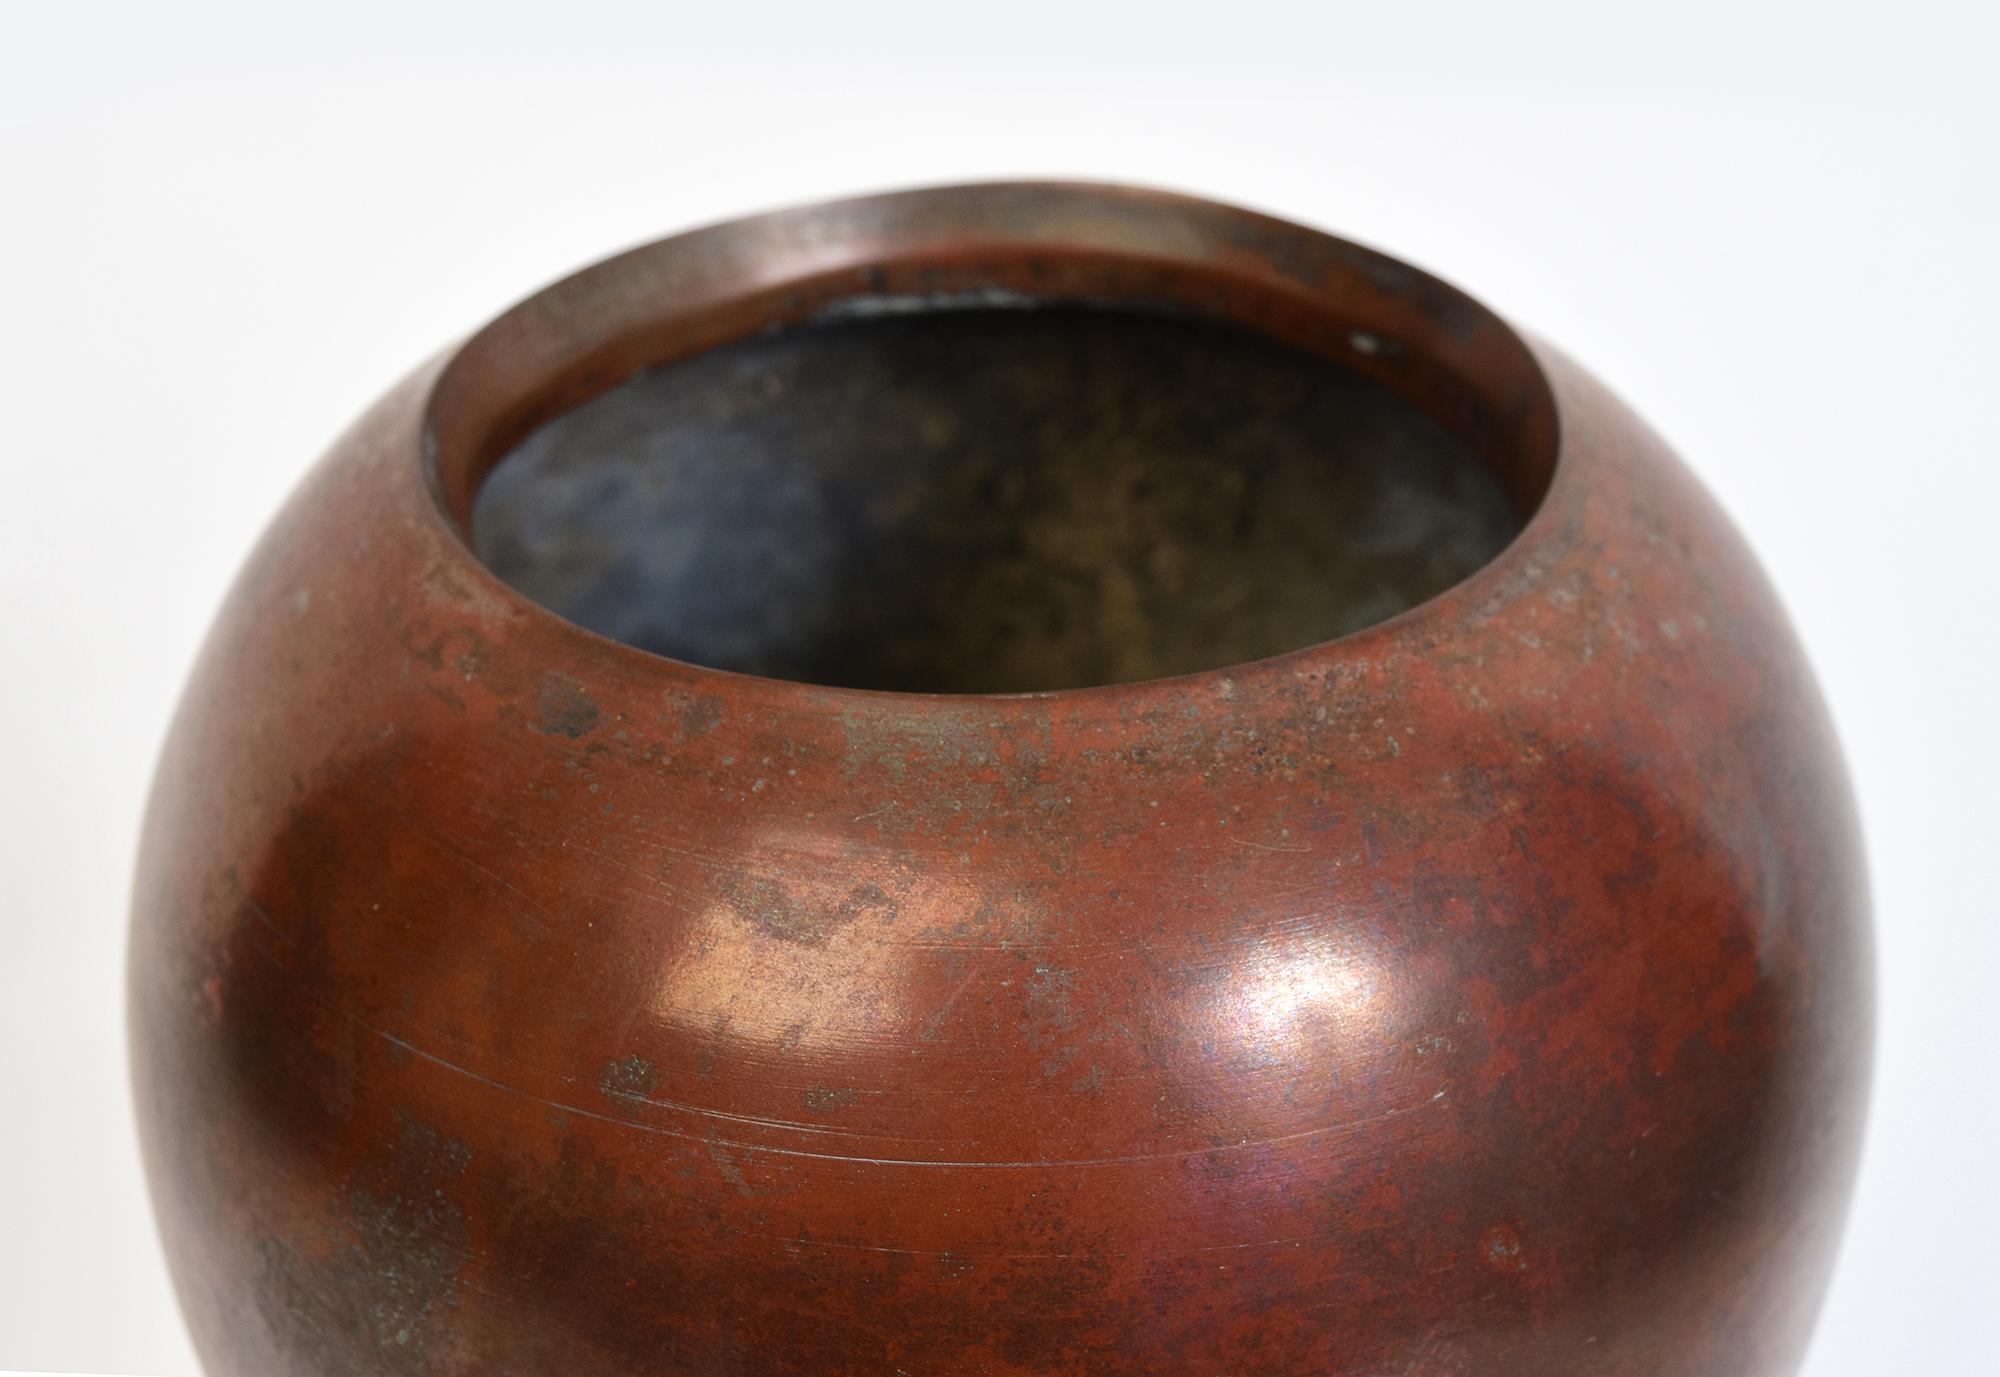 Japanese bronze vase with artist sign, used to decorate single flower arrangement in Japanese traditional tea ceremony. 
Artist signature is on the last photo.

Age: Japan, Showa Period, Early 20th Century
Size: Height 26.7 C.M. / Width 11.2